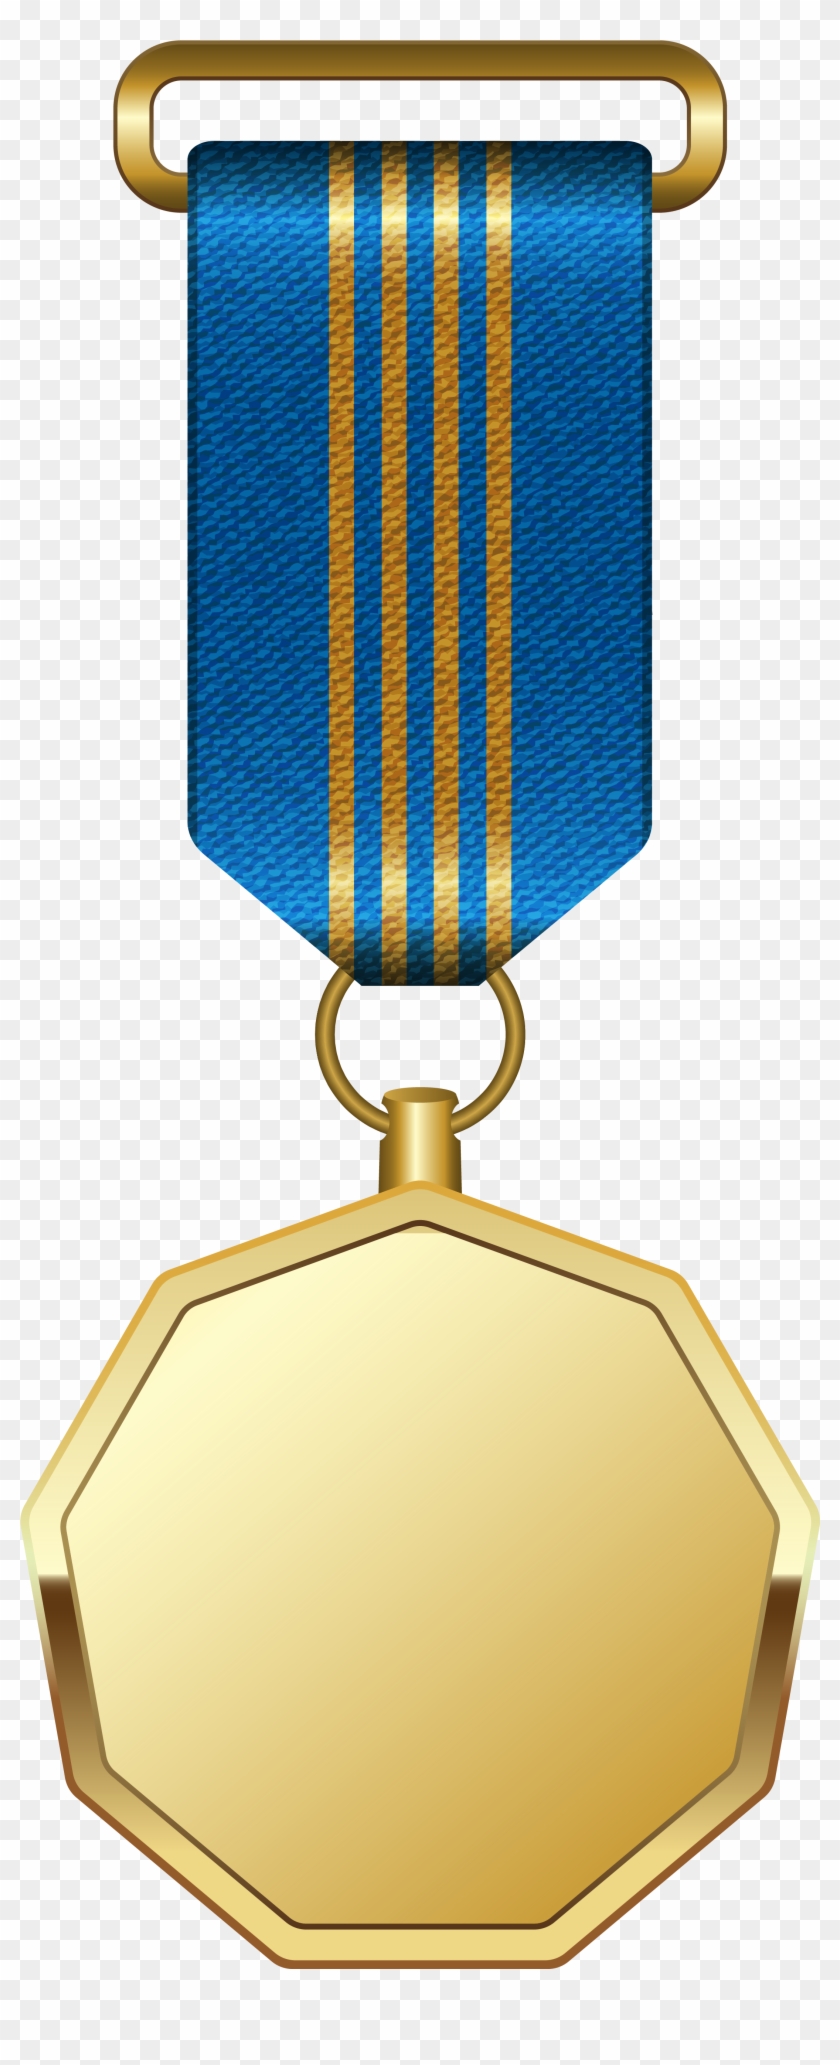 Gold Medal With Blue Ribbon Png Clipart Picture - Medal With Blue Ribbon #467911